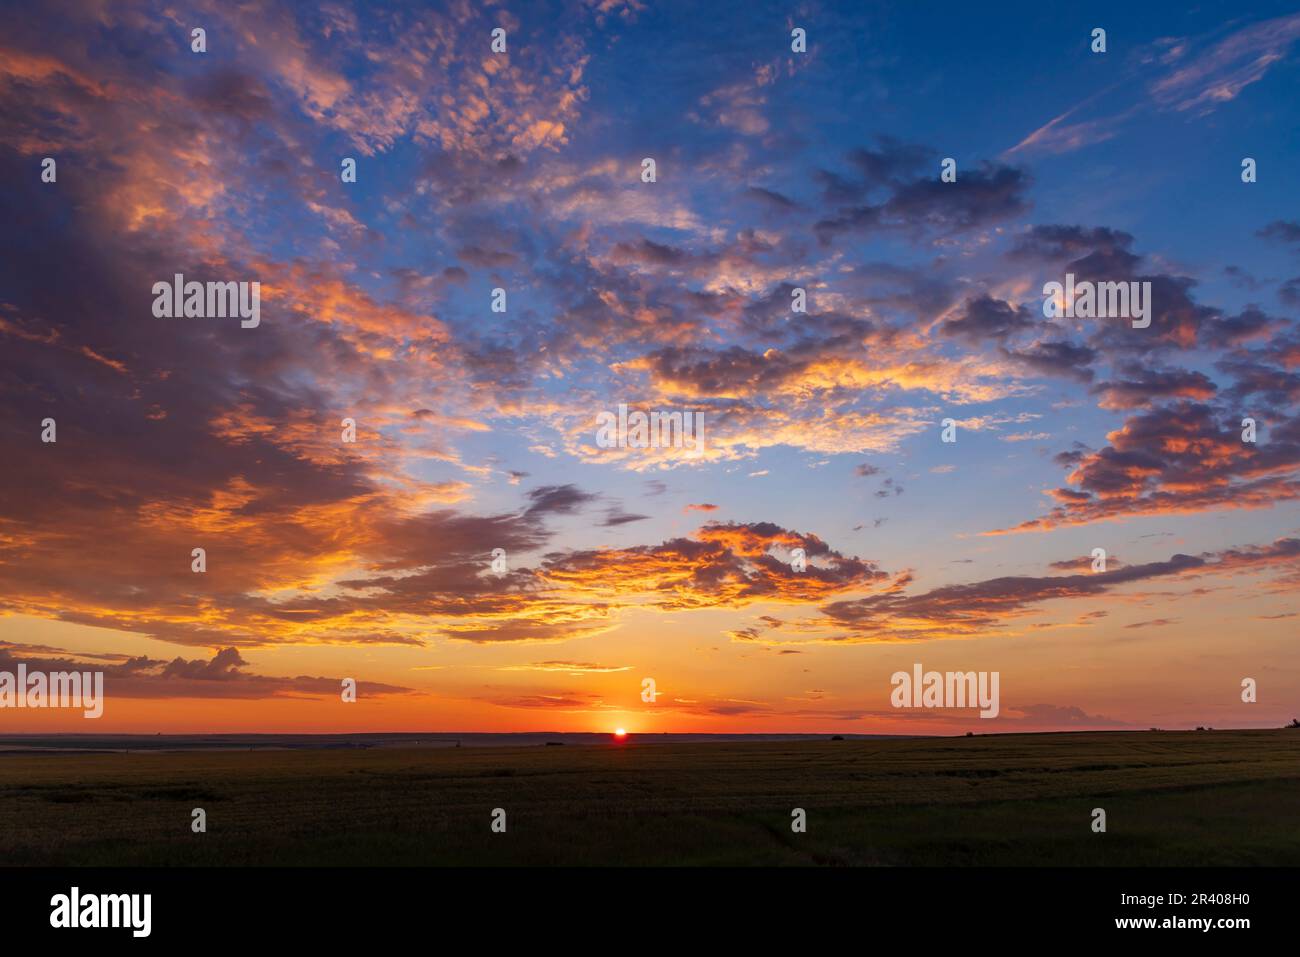 A colorful sunrise scene taken on an Alberta prairie just as the Sun came up. Stock Photo